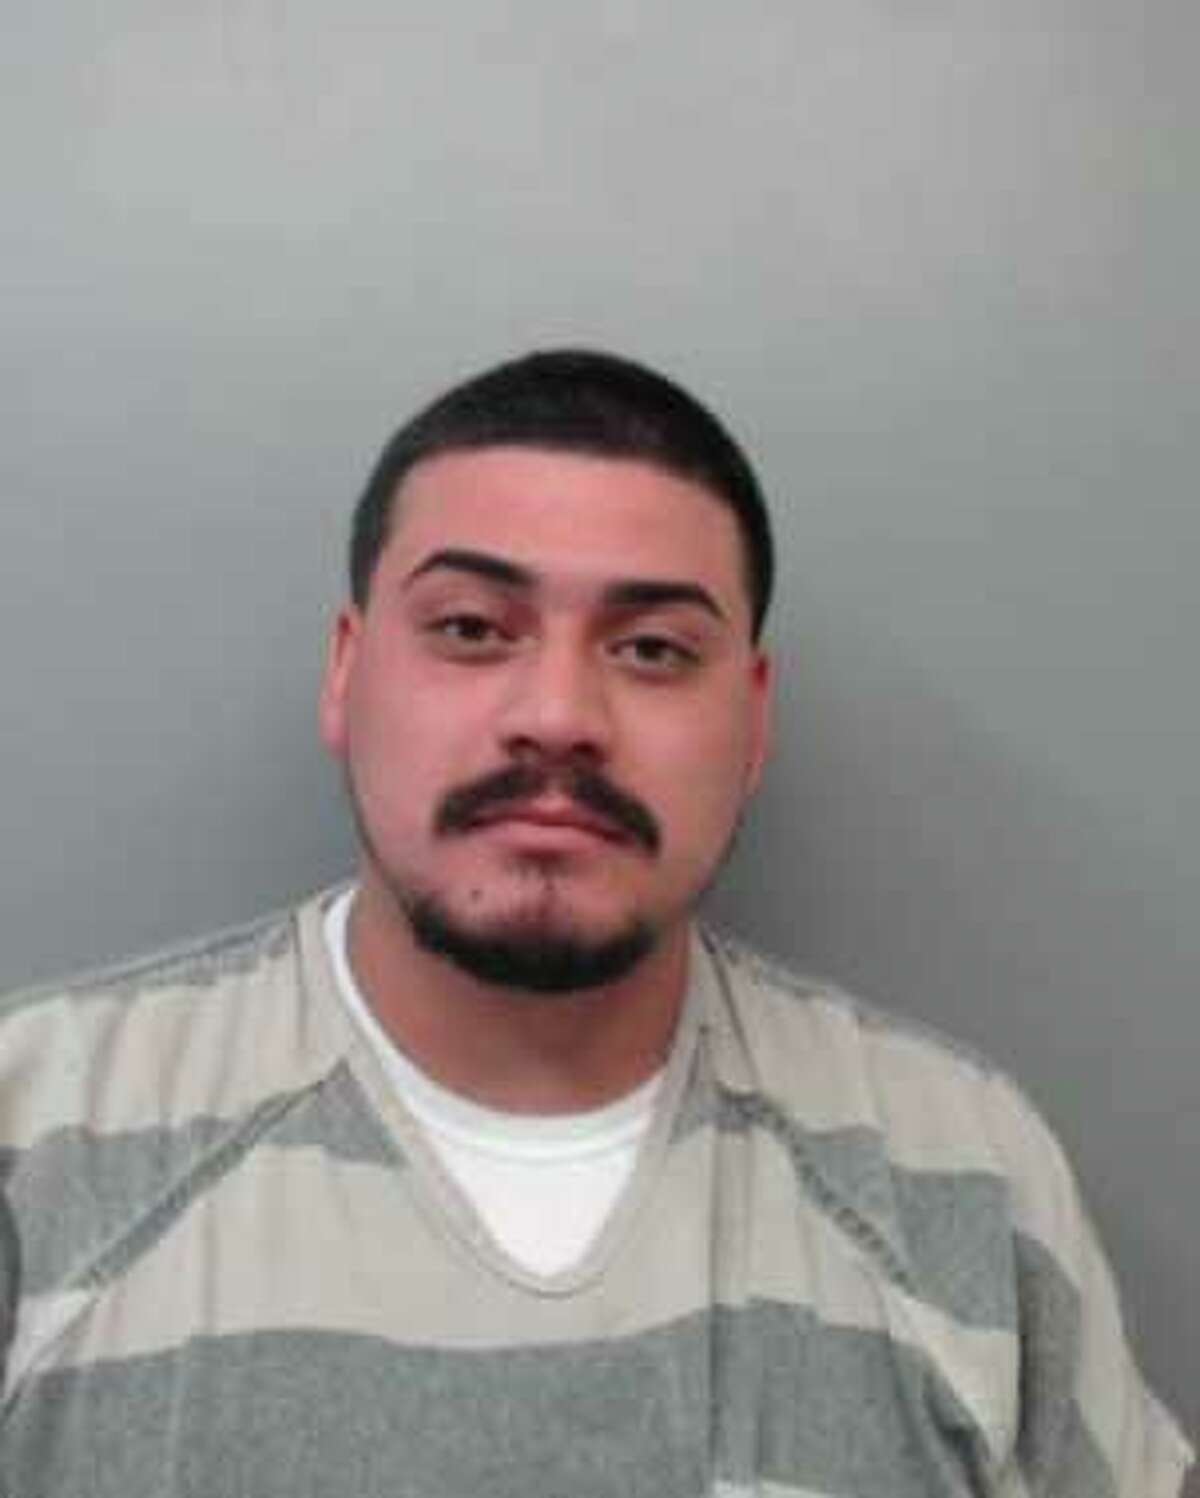 Alejandro Gutierrez, 23, was charged with four counts of driving while intoxicated with children younger than 15 years old.